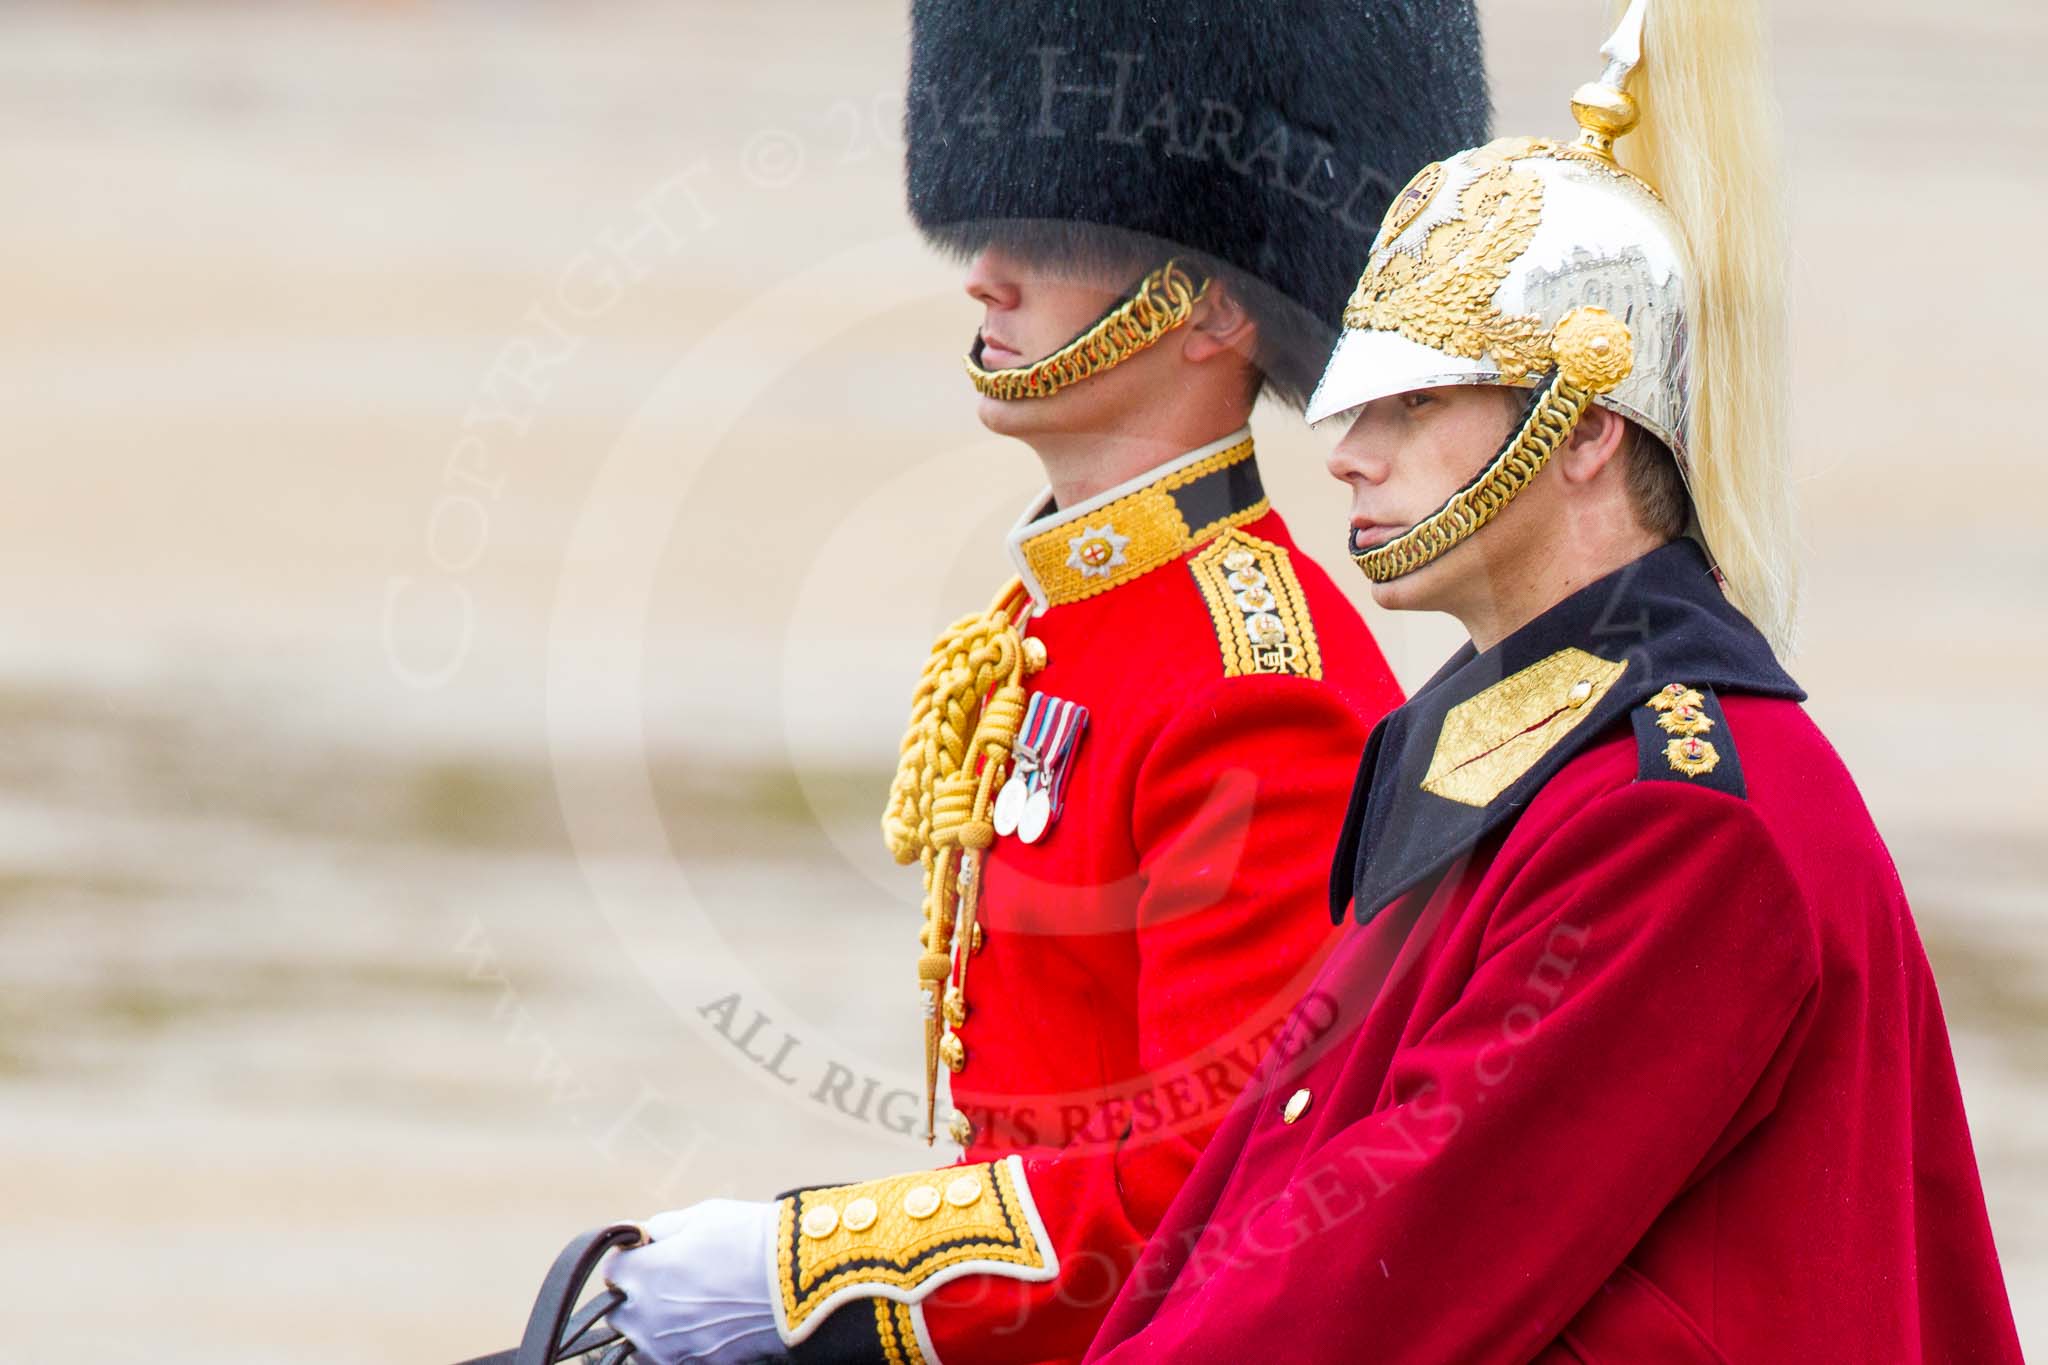 The Colonel's Review 2014.
Horse Guards Parade, Westminster,
London,

United Kingdom,
on 07 June 2014 at 11:01, image #275